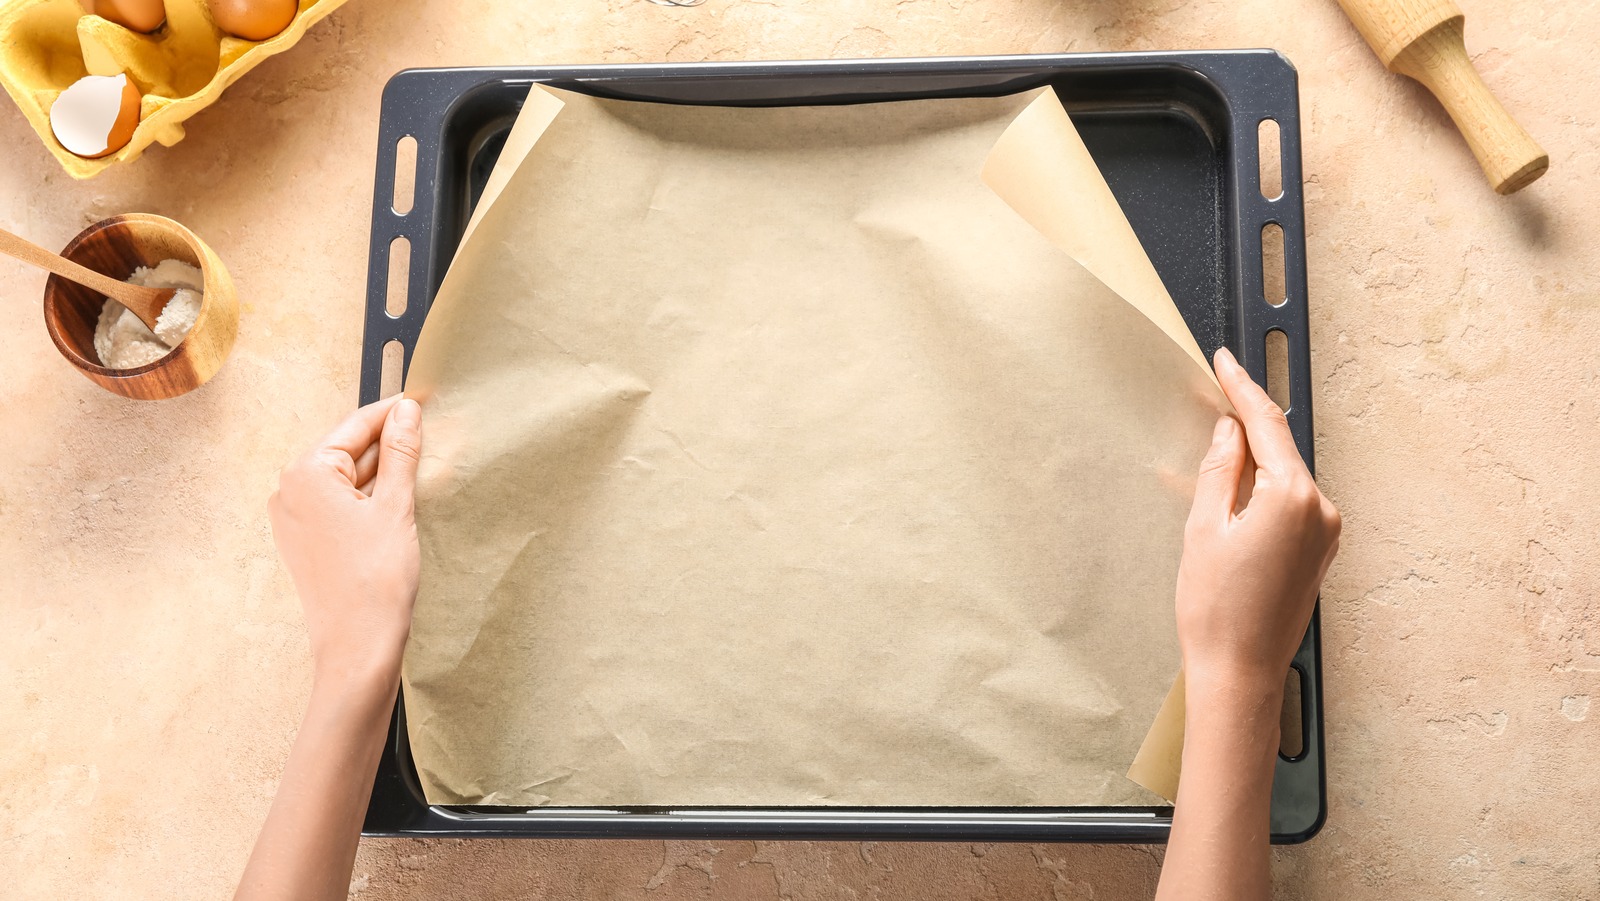 https://www.thedailymeal.com/img/gallery/the-parchment-paper-hack-to-uncover-your-ovens-hot-spots/l-intro-1690214490.jpg